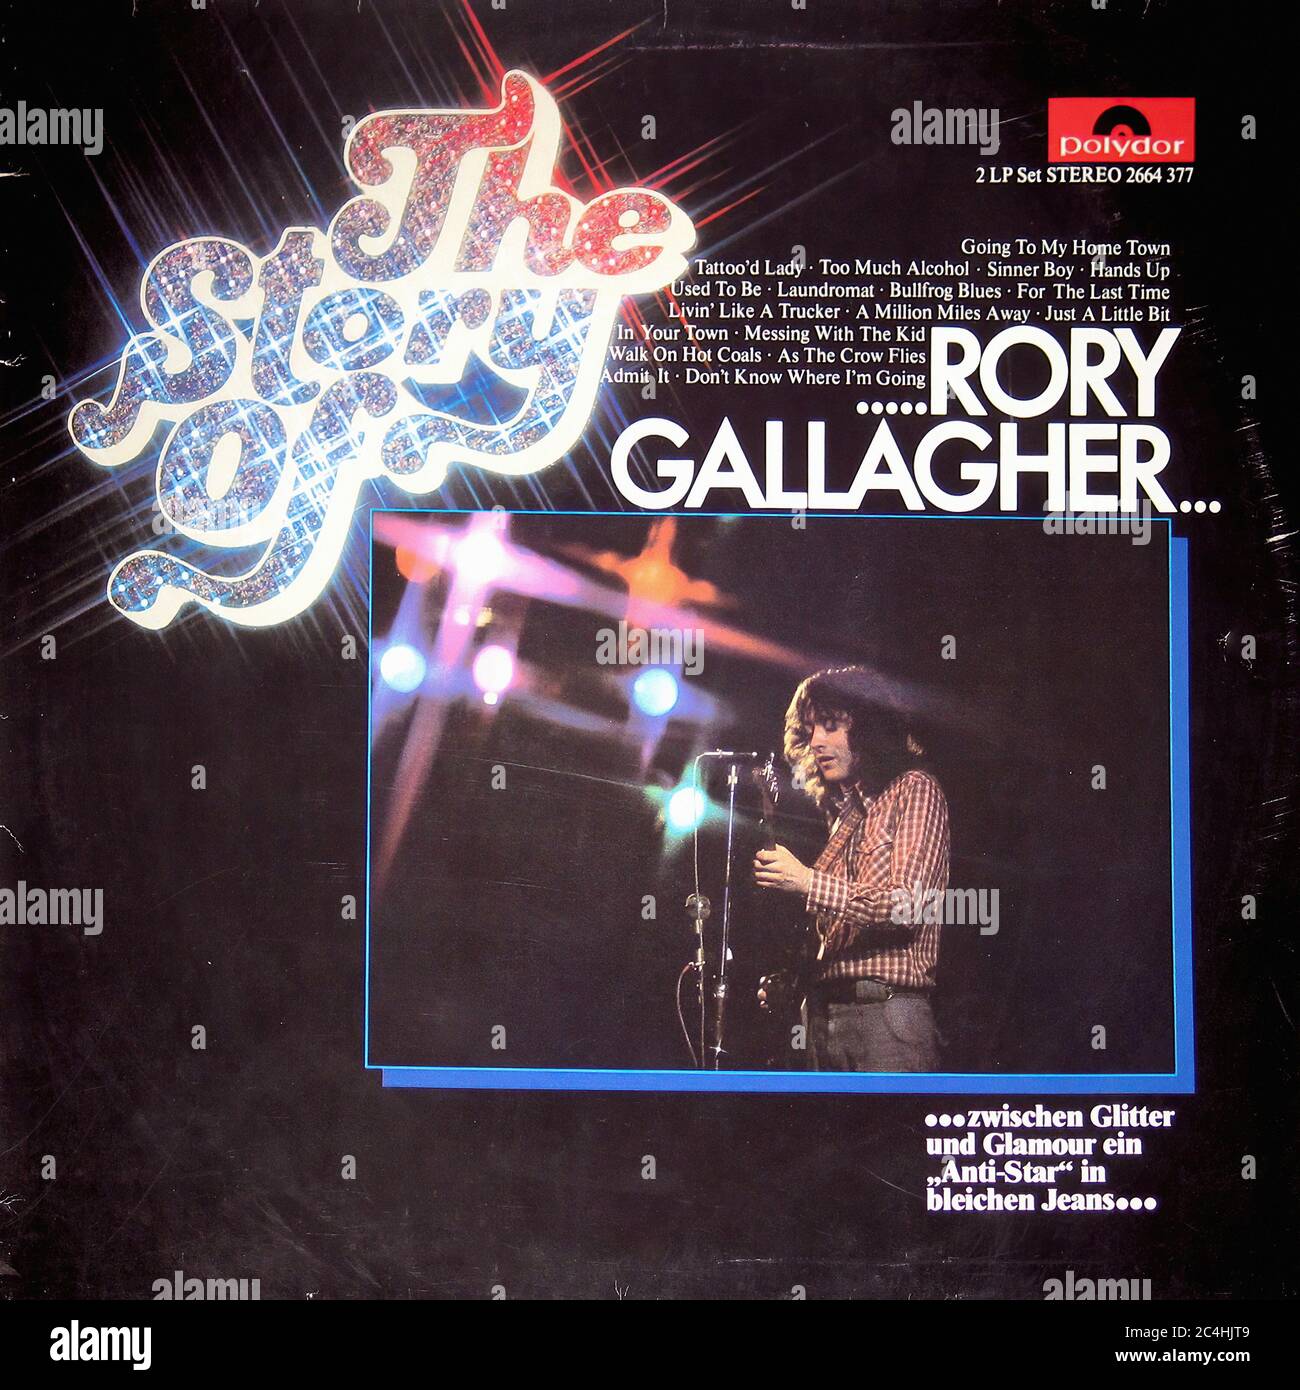 Rory Gallagher   the Story of Rory Gallagher 12'' Vinyl Lp - Vintage Record Cover Stock Photo